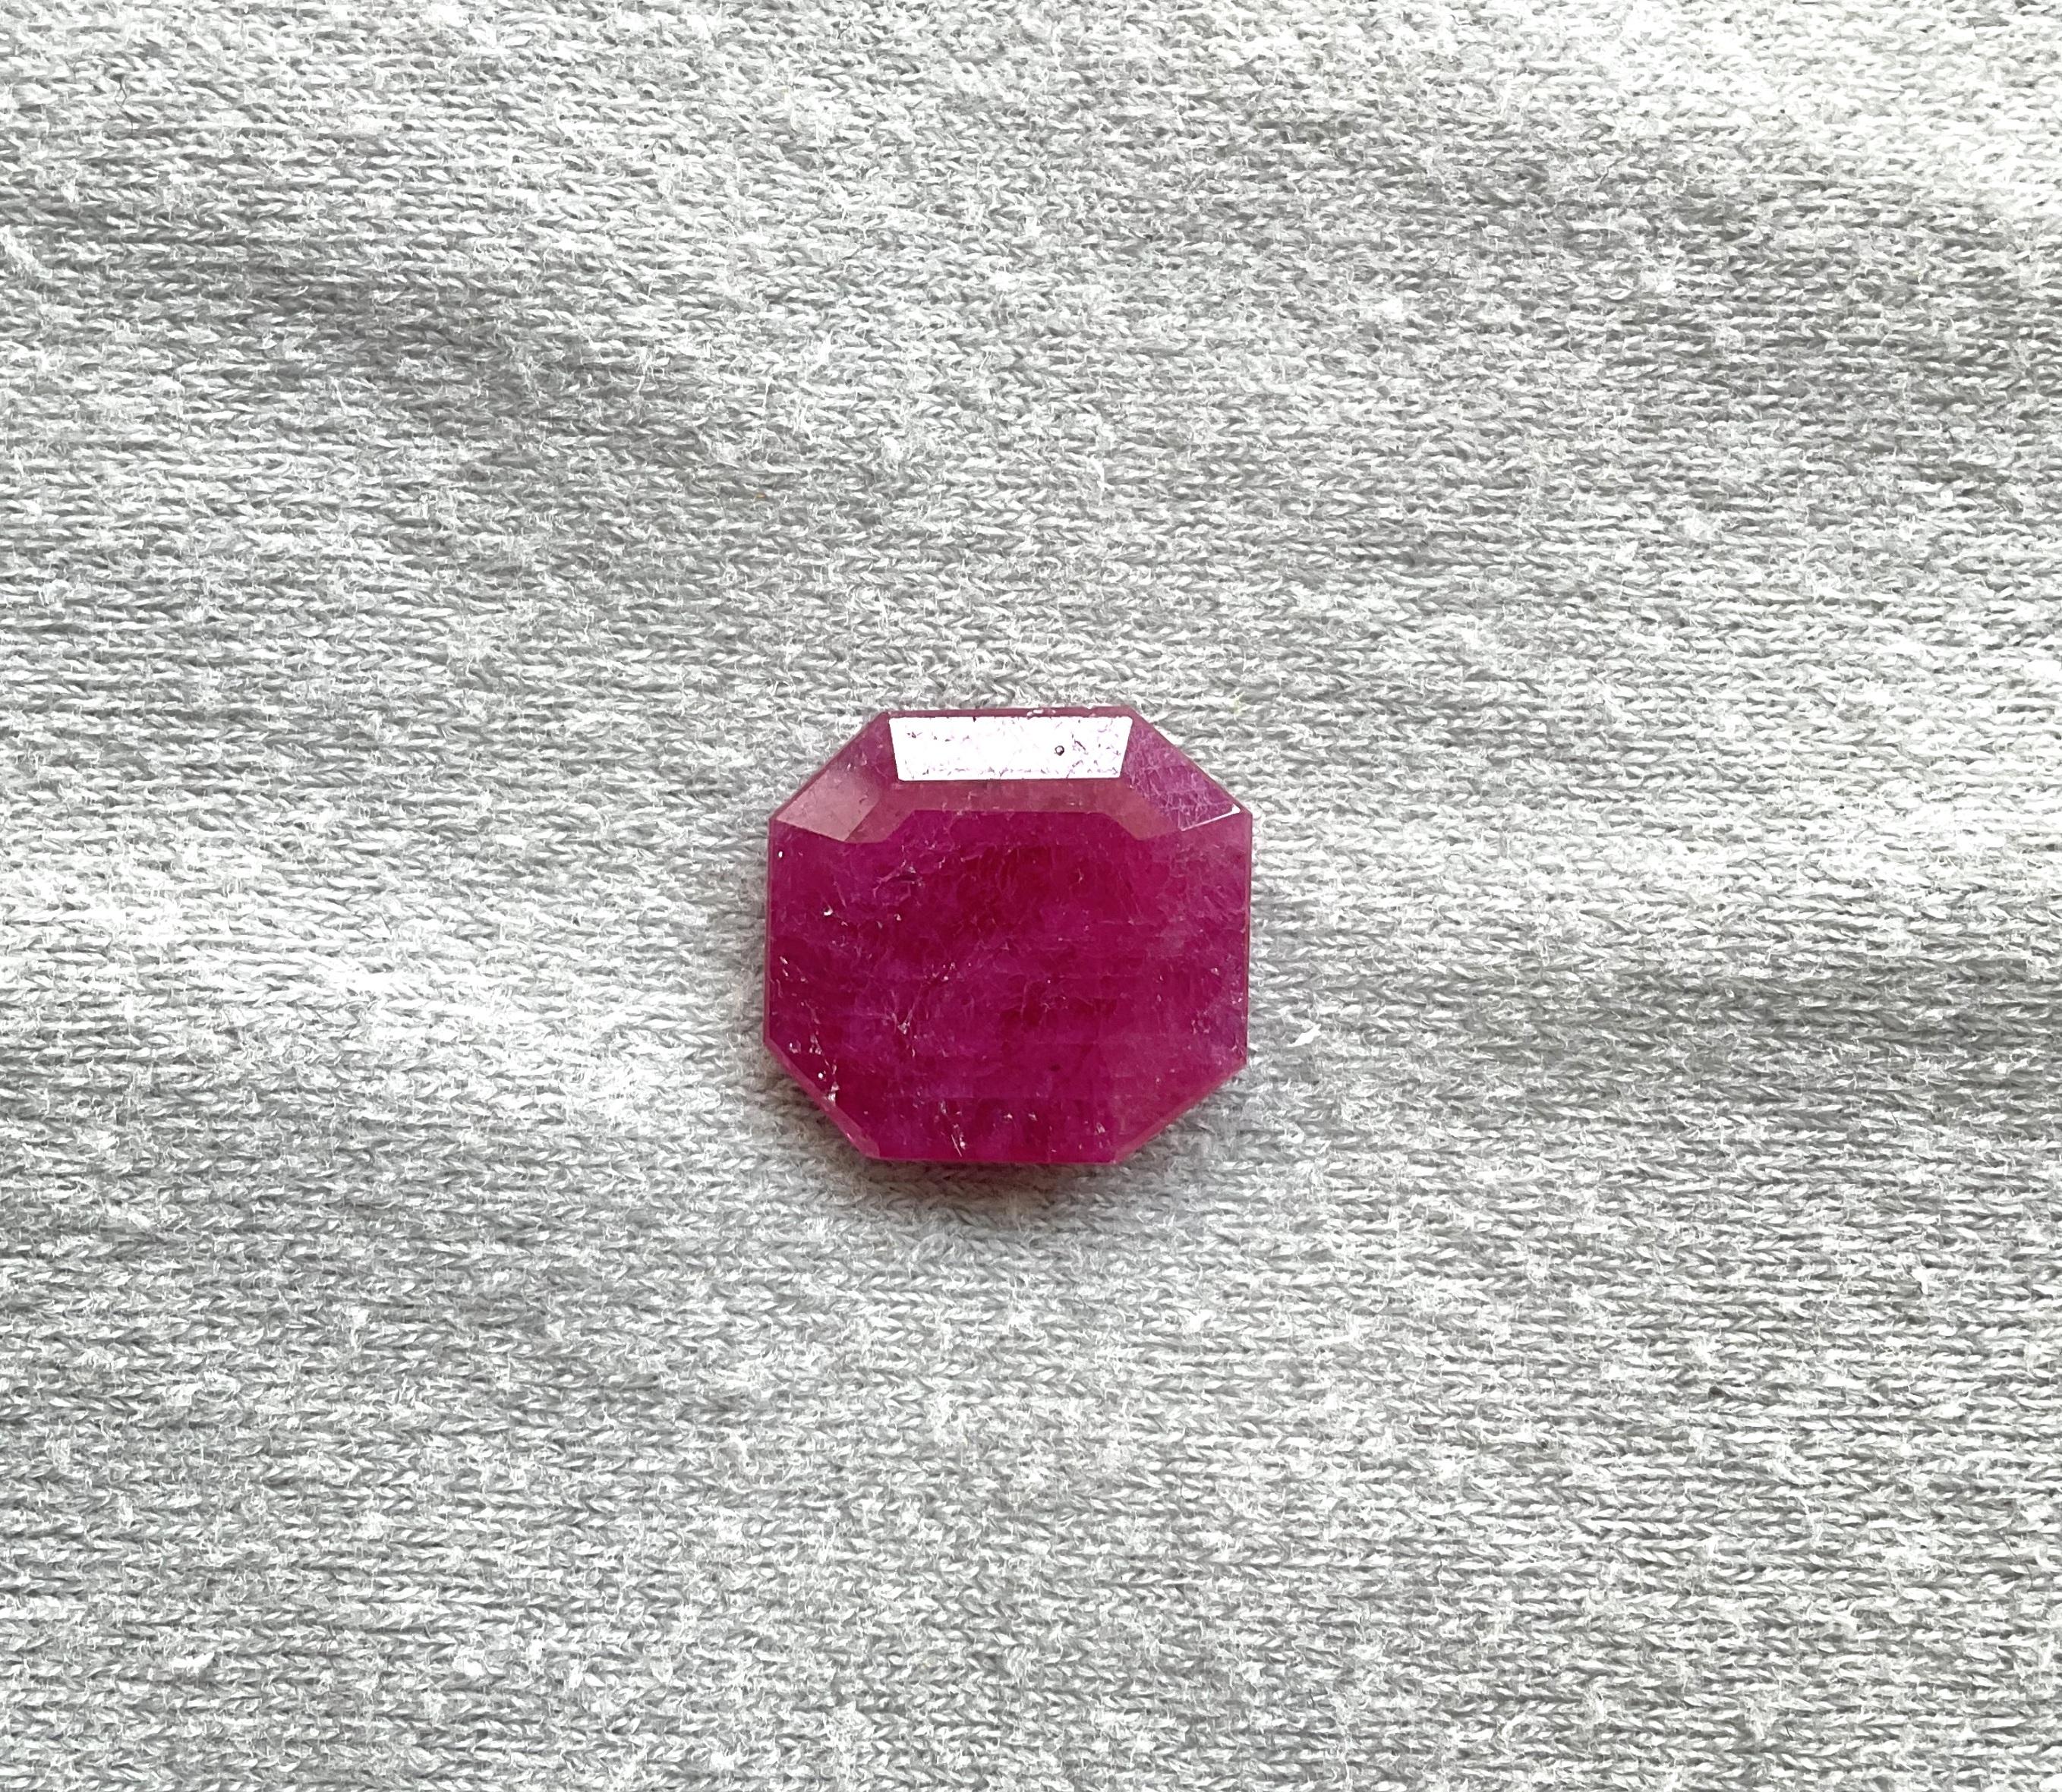 As we are auction partners at Gemfields, we have sourced these rubies from winning auctions and had cut them in our in house manufacturing responsibly.

Origin: Mozambique
Weight: 7.51 Carats
Size: 14x3x13 MM
Pieces: 1
Shape: Faceted Square octagon